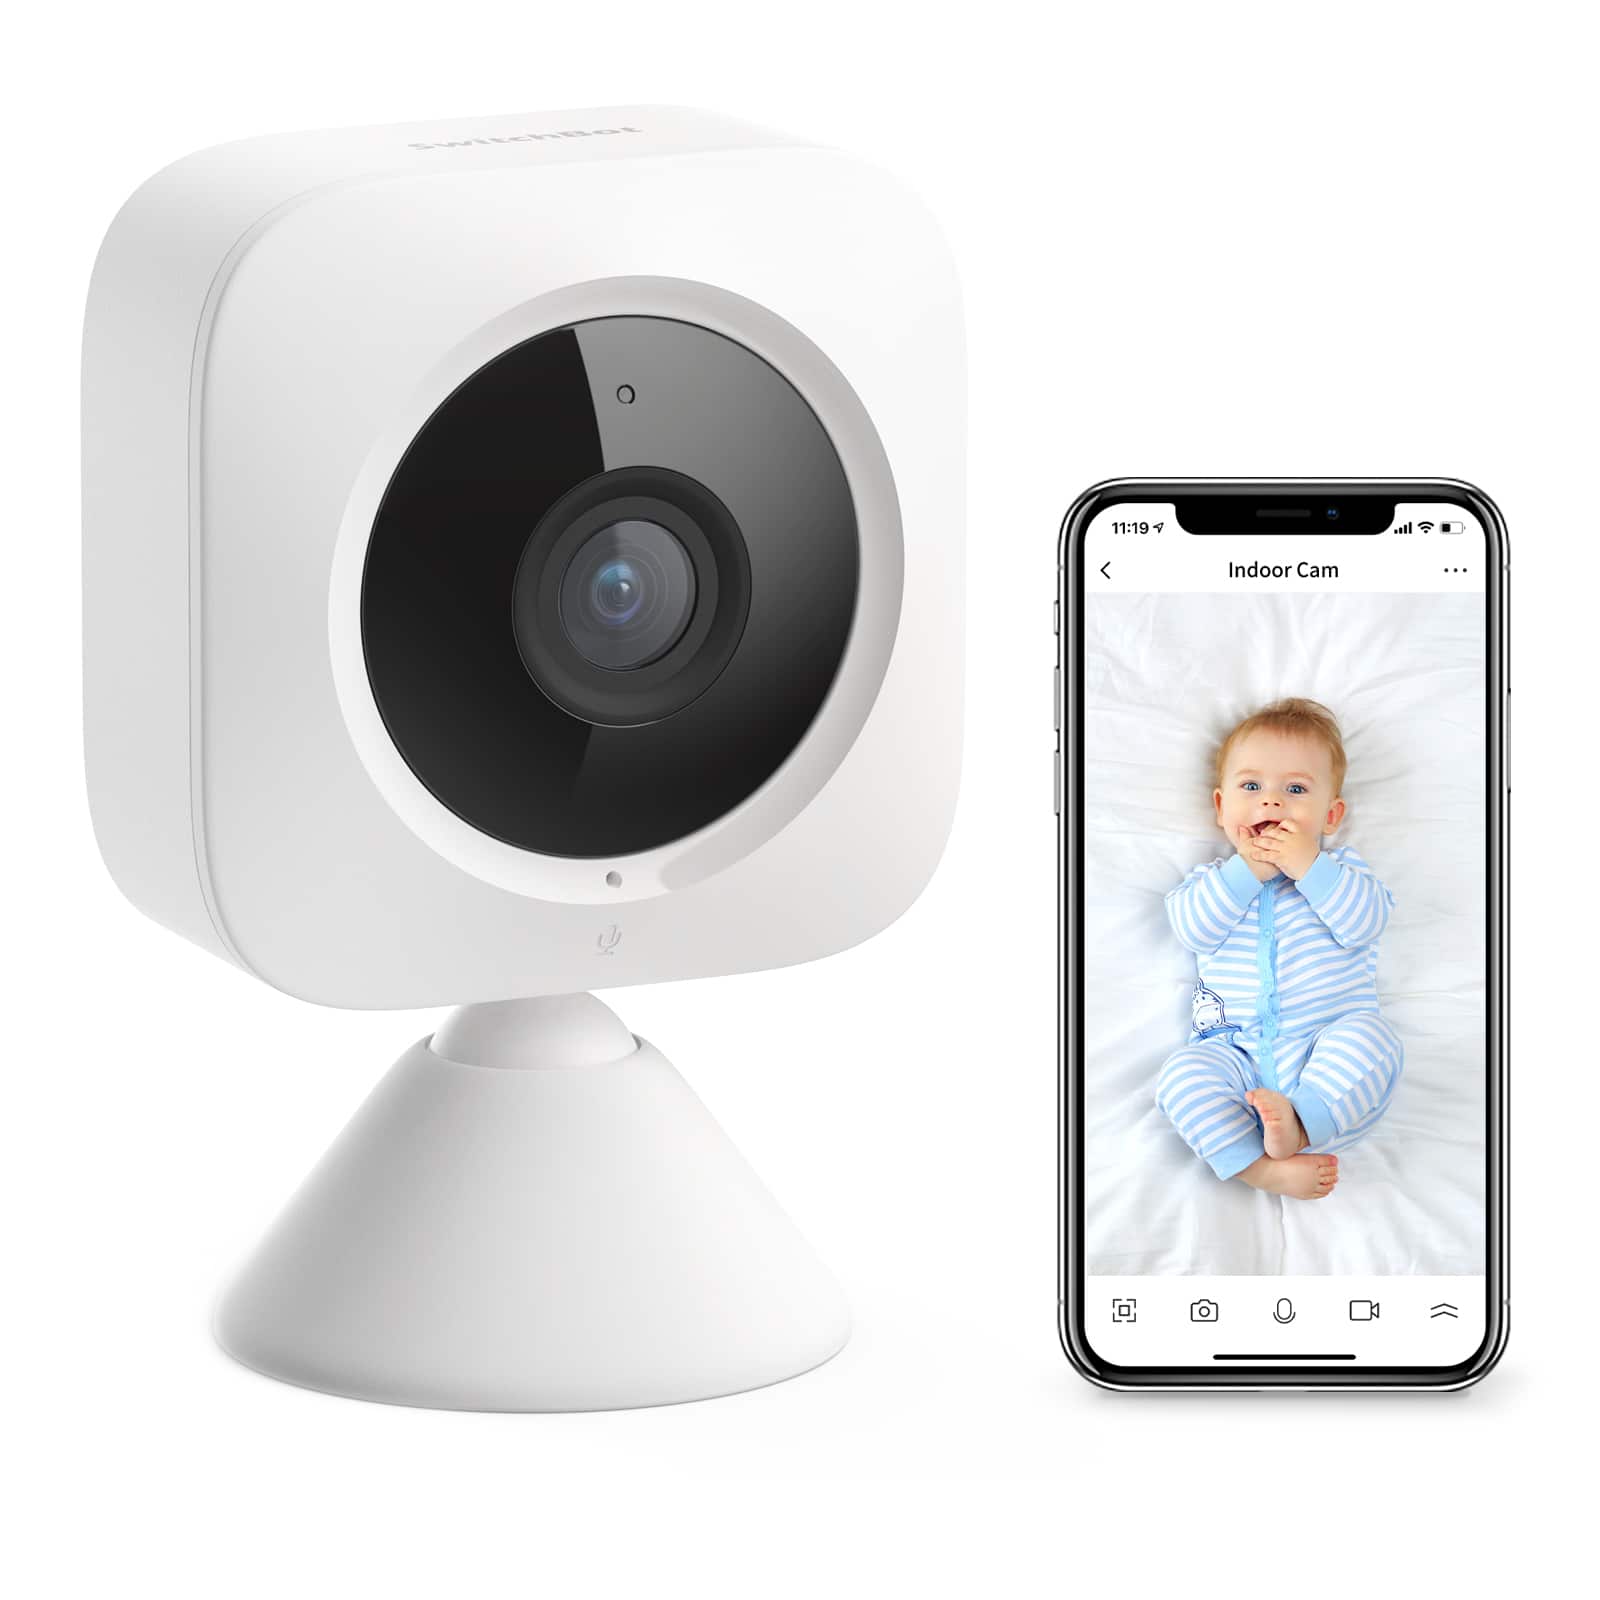 Flash Sale: SwitchBot Smart Indoor WiFi Security 1080p Camera $15.89 + Free Shipping w/ Prime or orders $25+